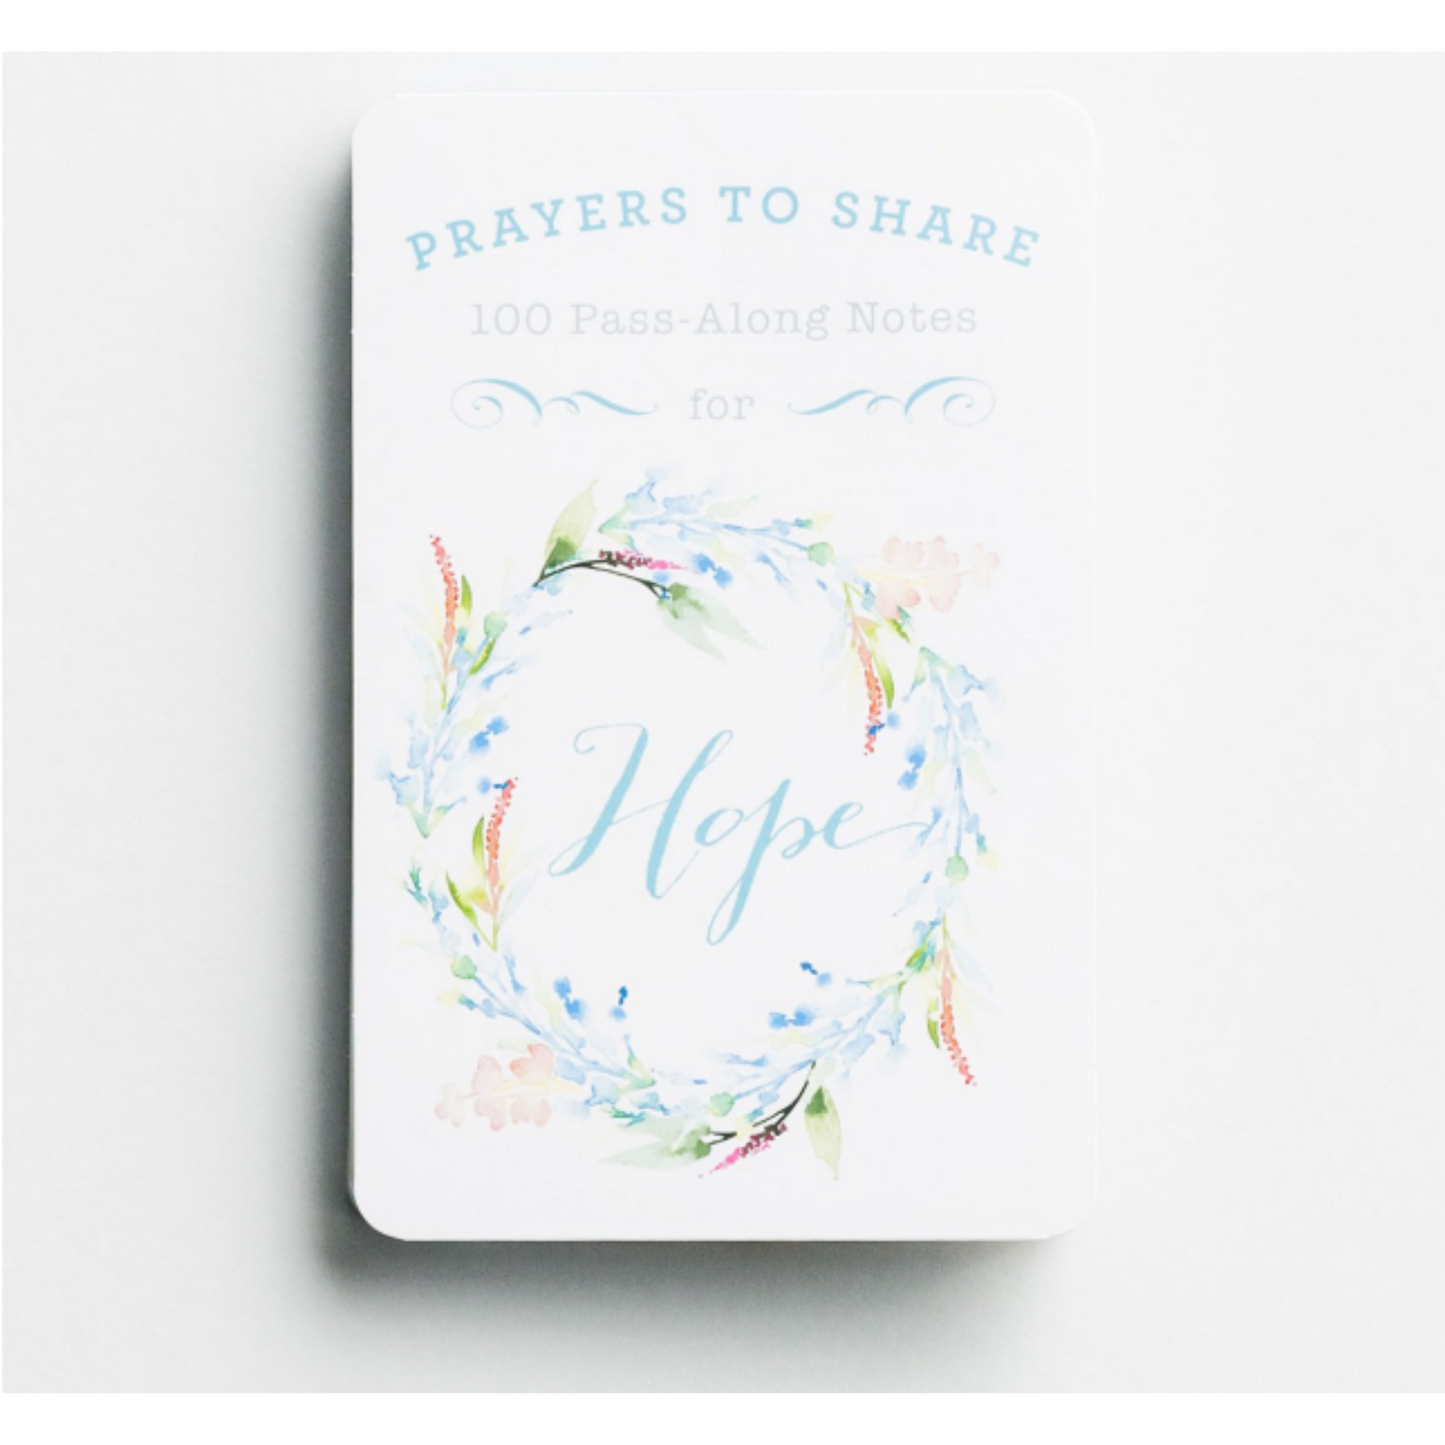 Prayers To Share: 100 Pass-Along Notes for Hope (#70131)